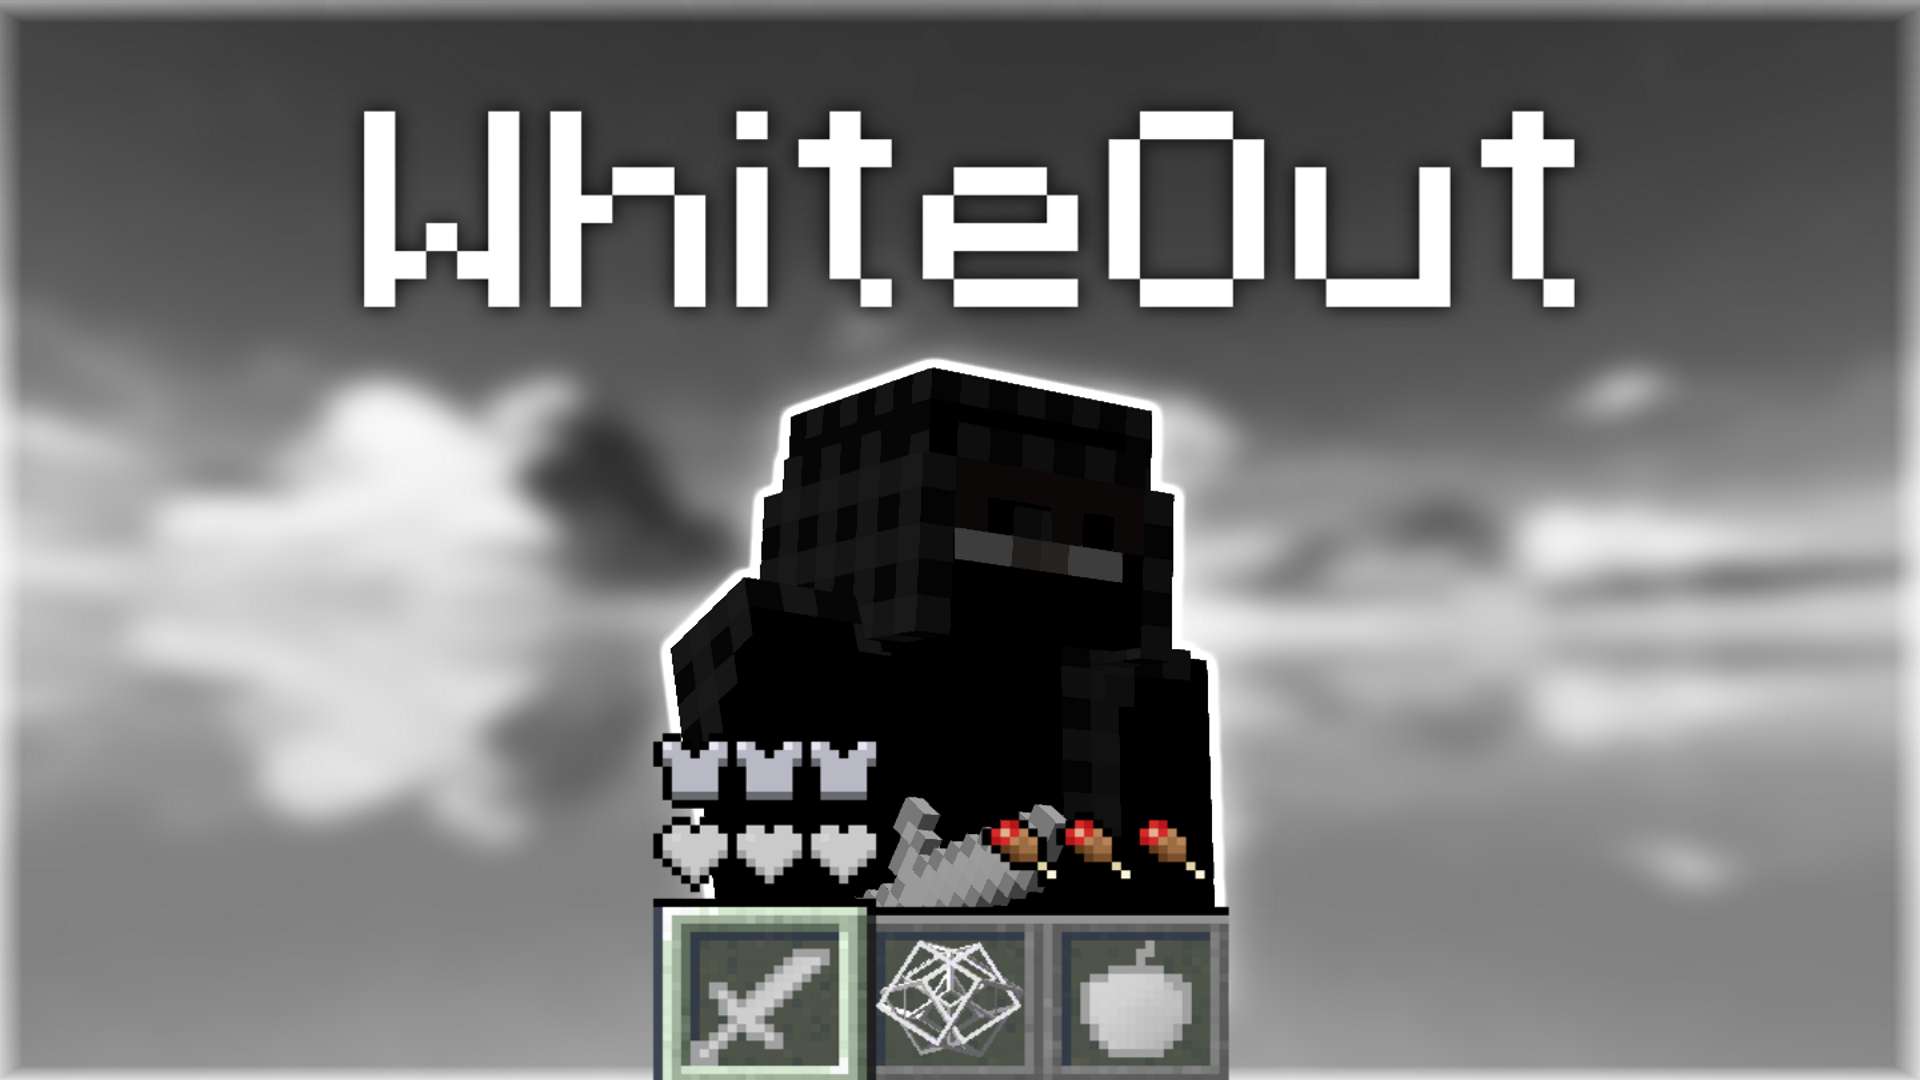 WhiteOut by Zocr 16 by Spxmder on PvPRP